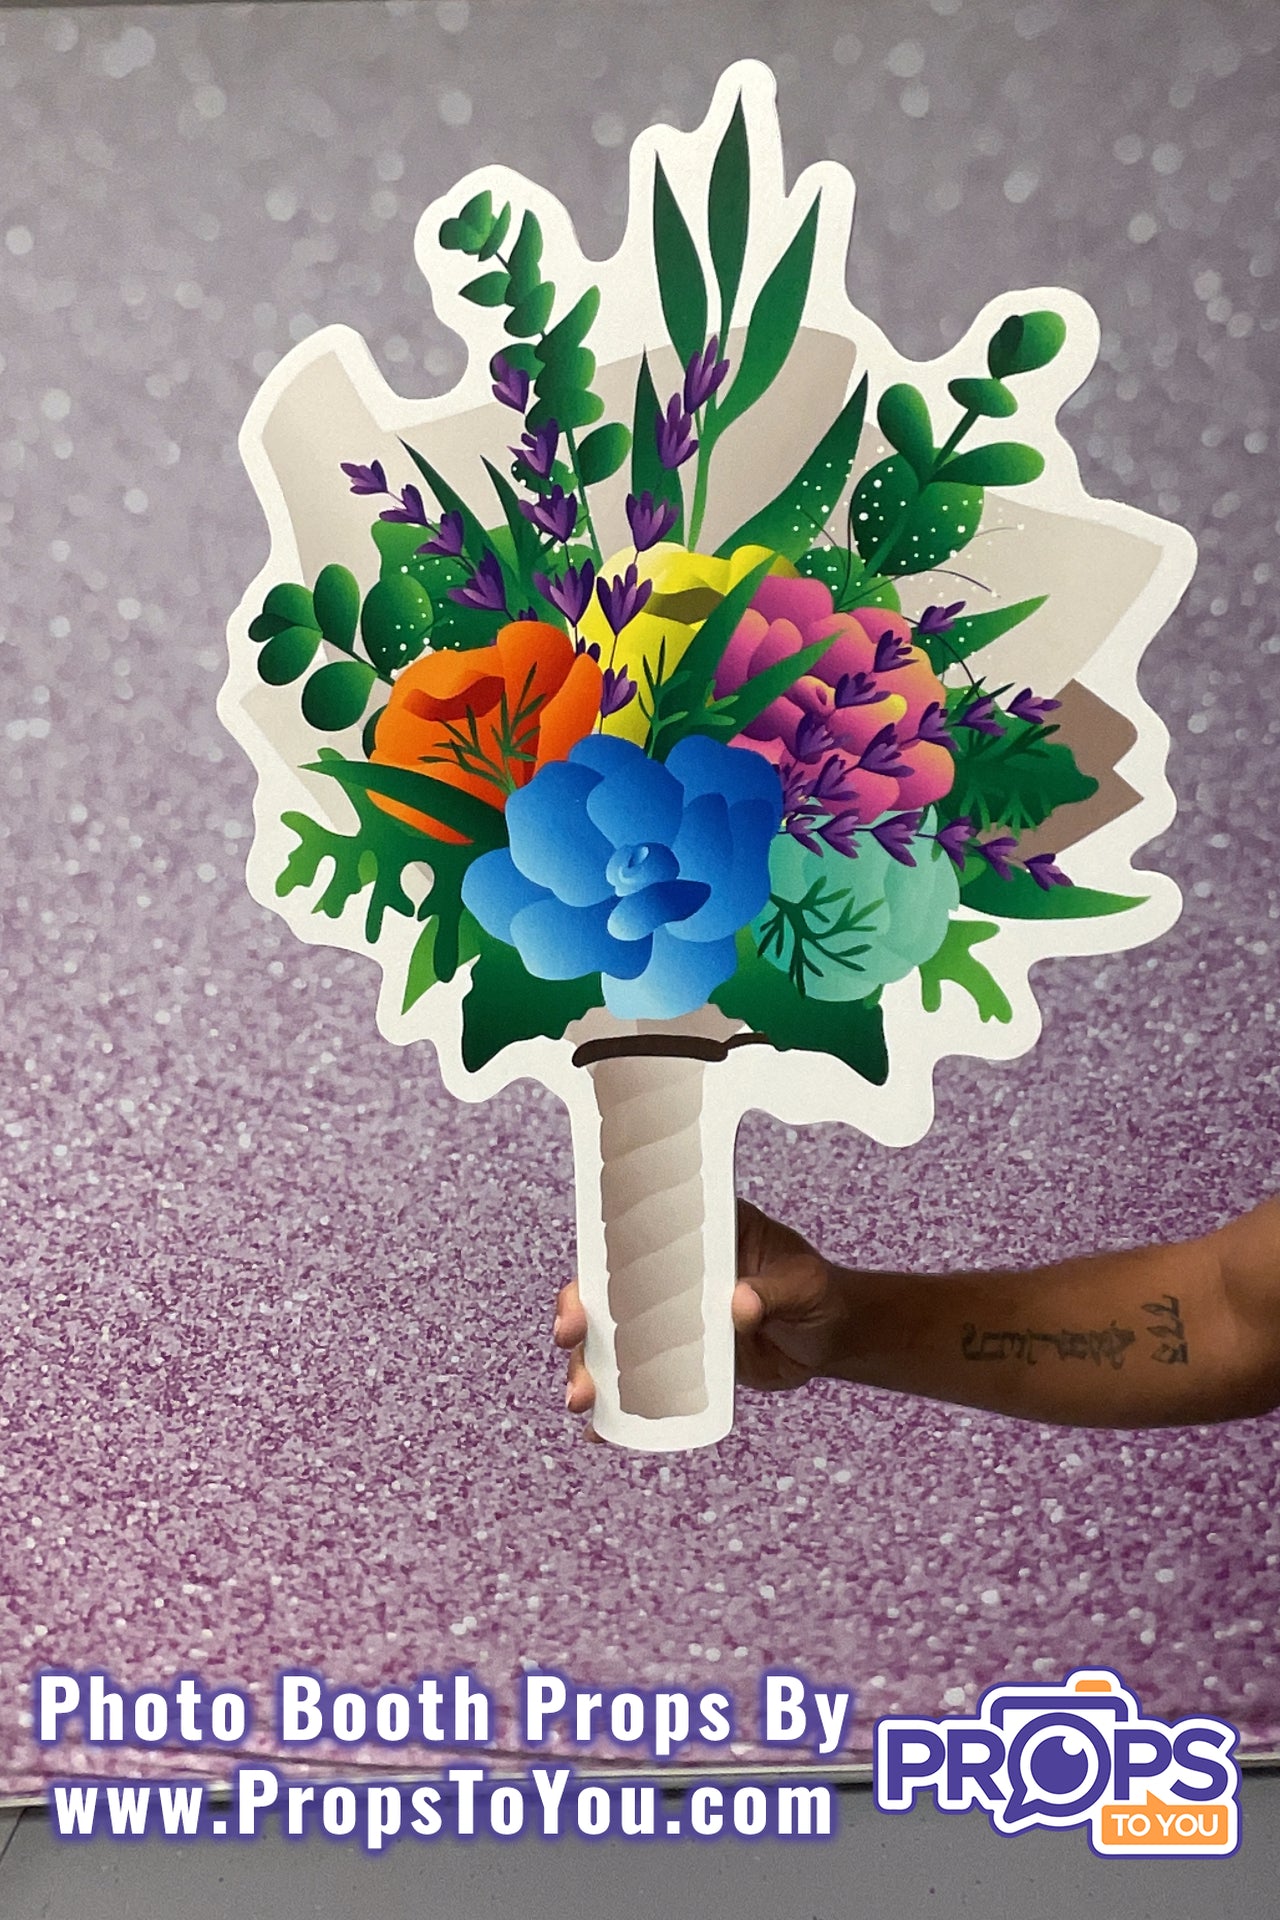 HUGE Props: Colorful Bouquet Photo Booth Prop